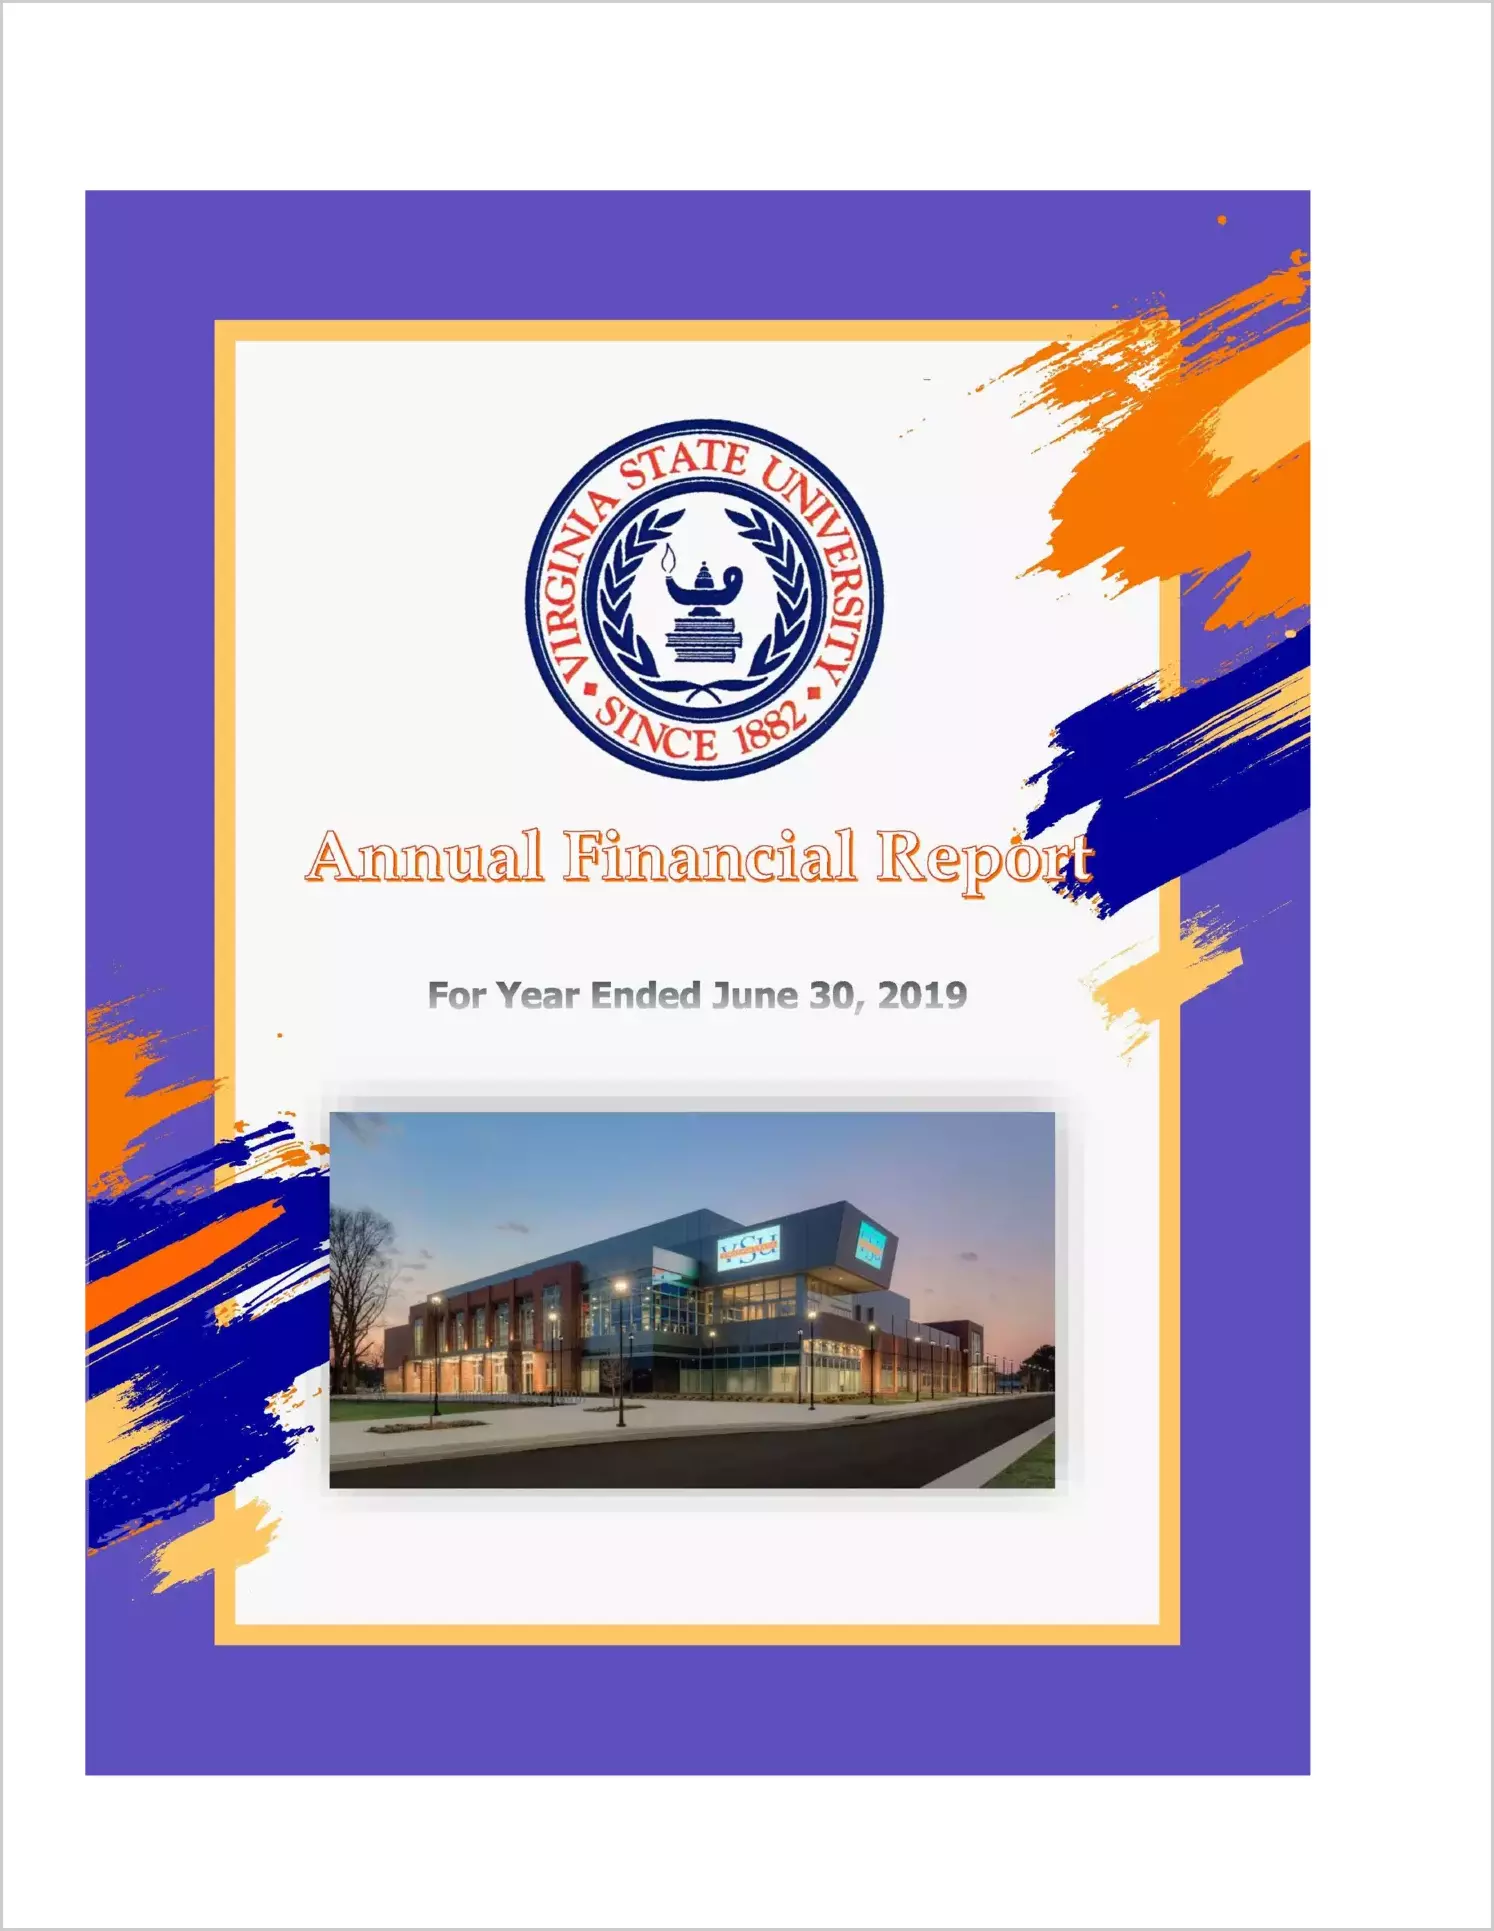 Virginia State University Financial Statements for the year ended June 30, 2019